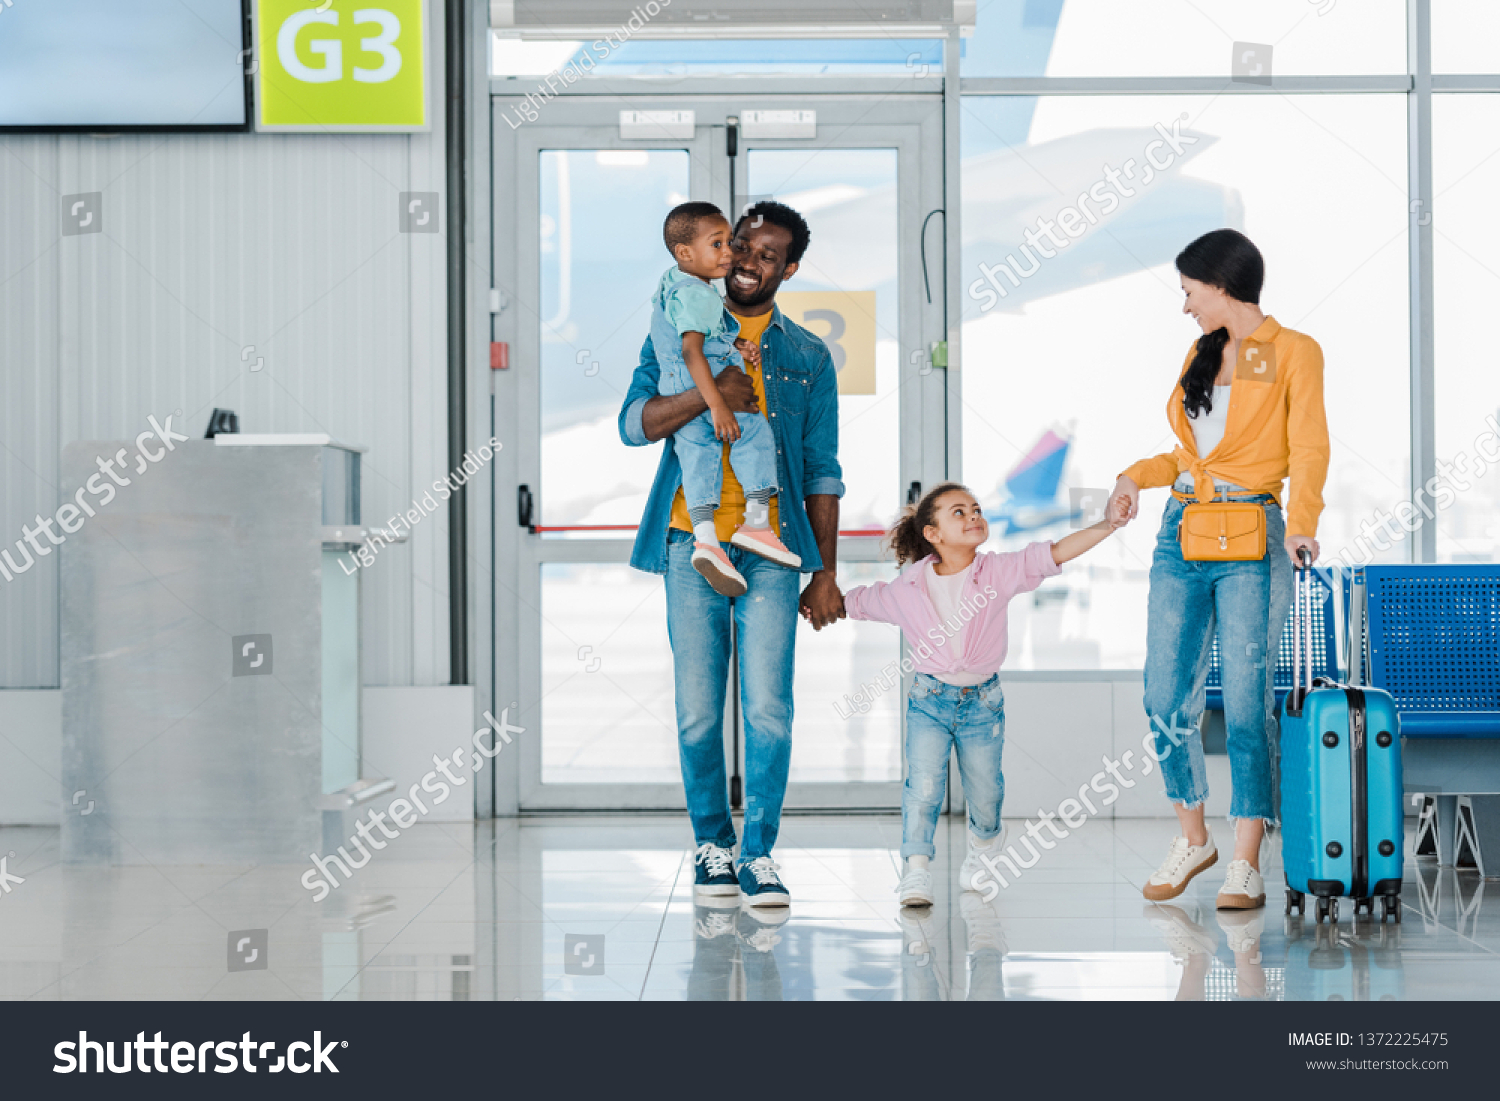 Waiting hall. Family in Airport. Афро семья в аэропорту. Family Travel Airport. Flying with Family Airport.